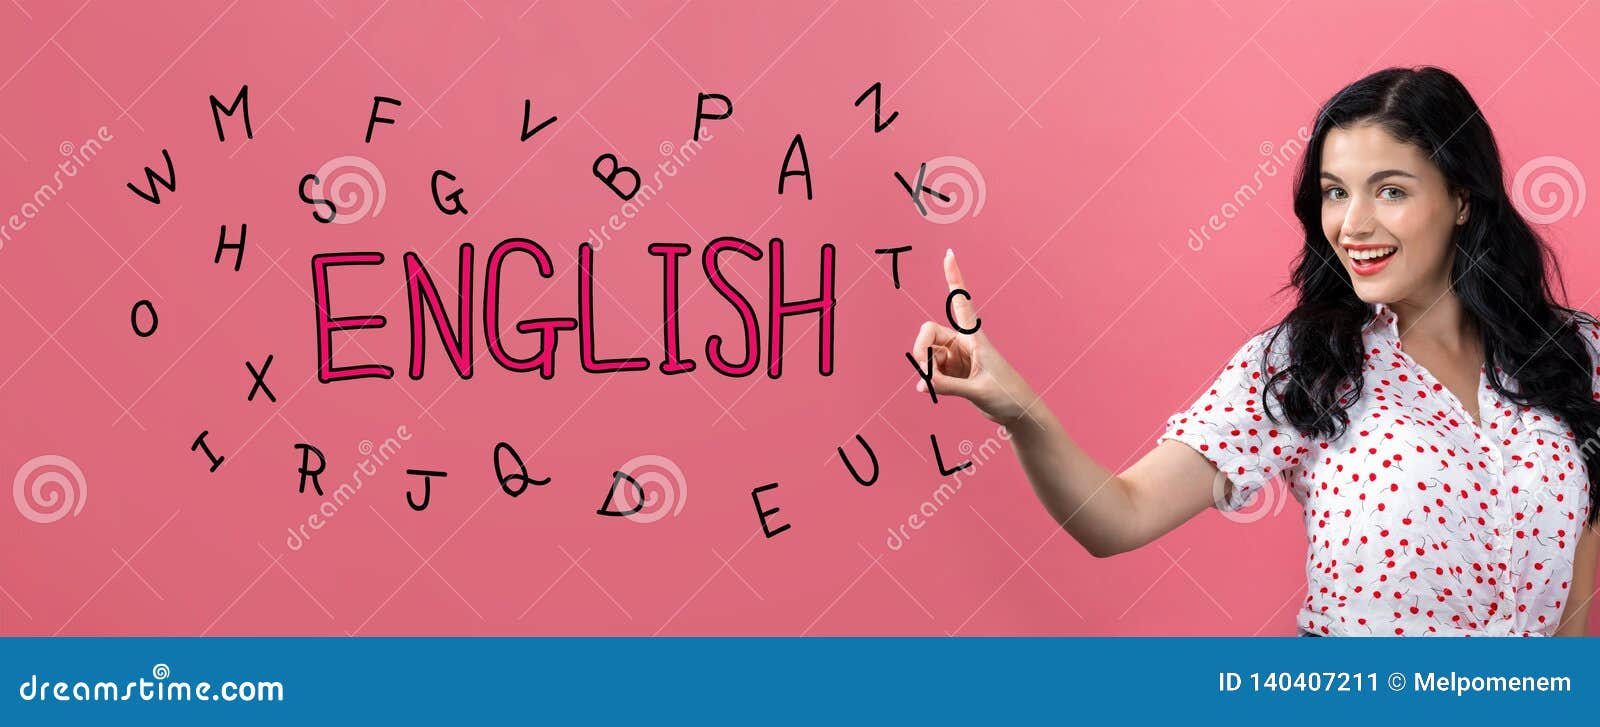 English Theme with Young Woman Stock Image - Image of education